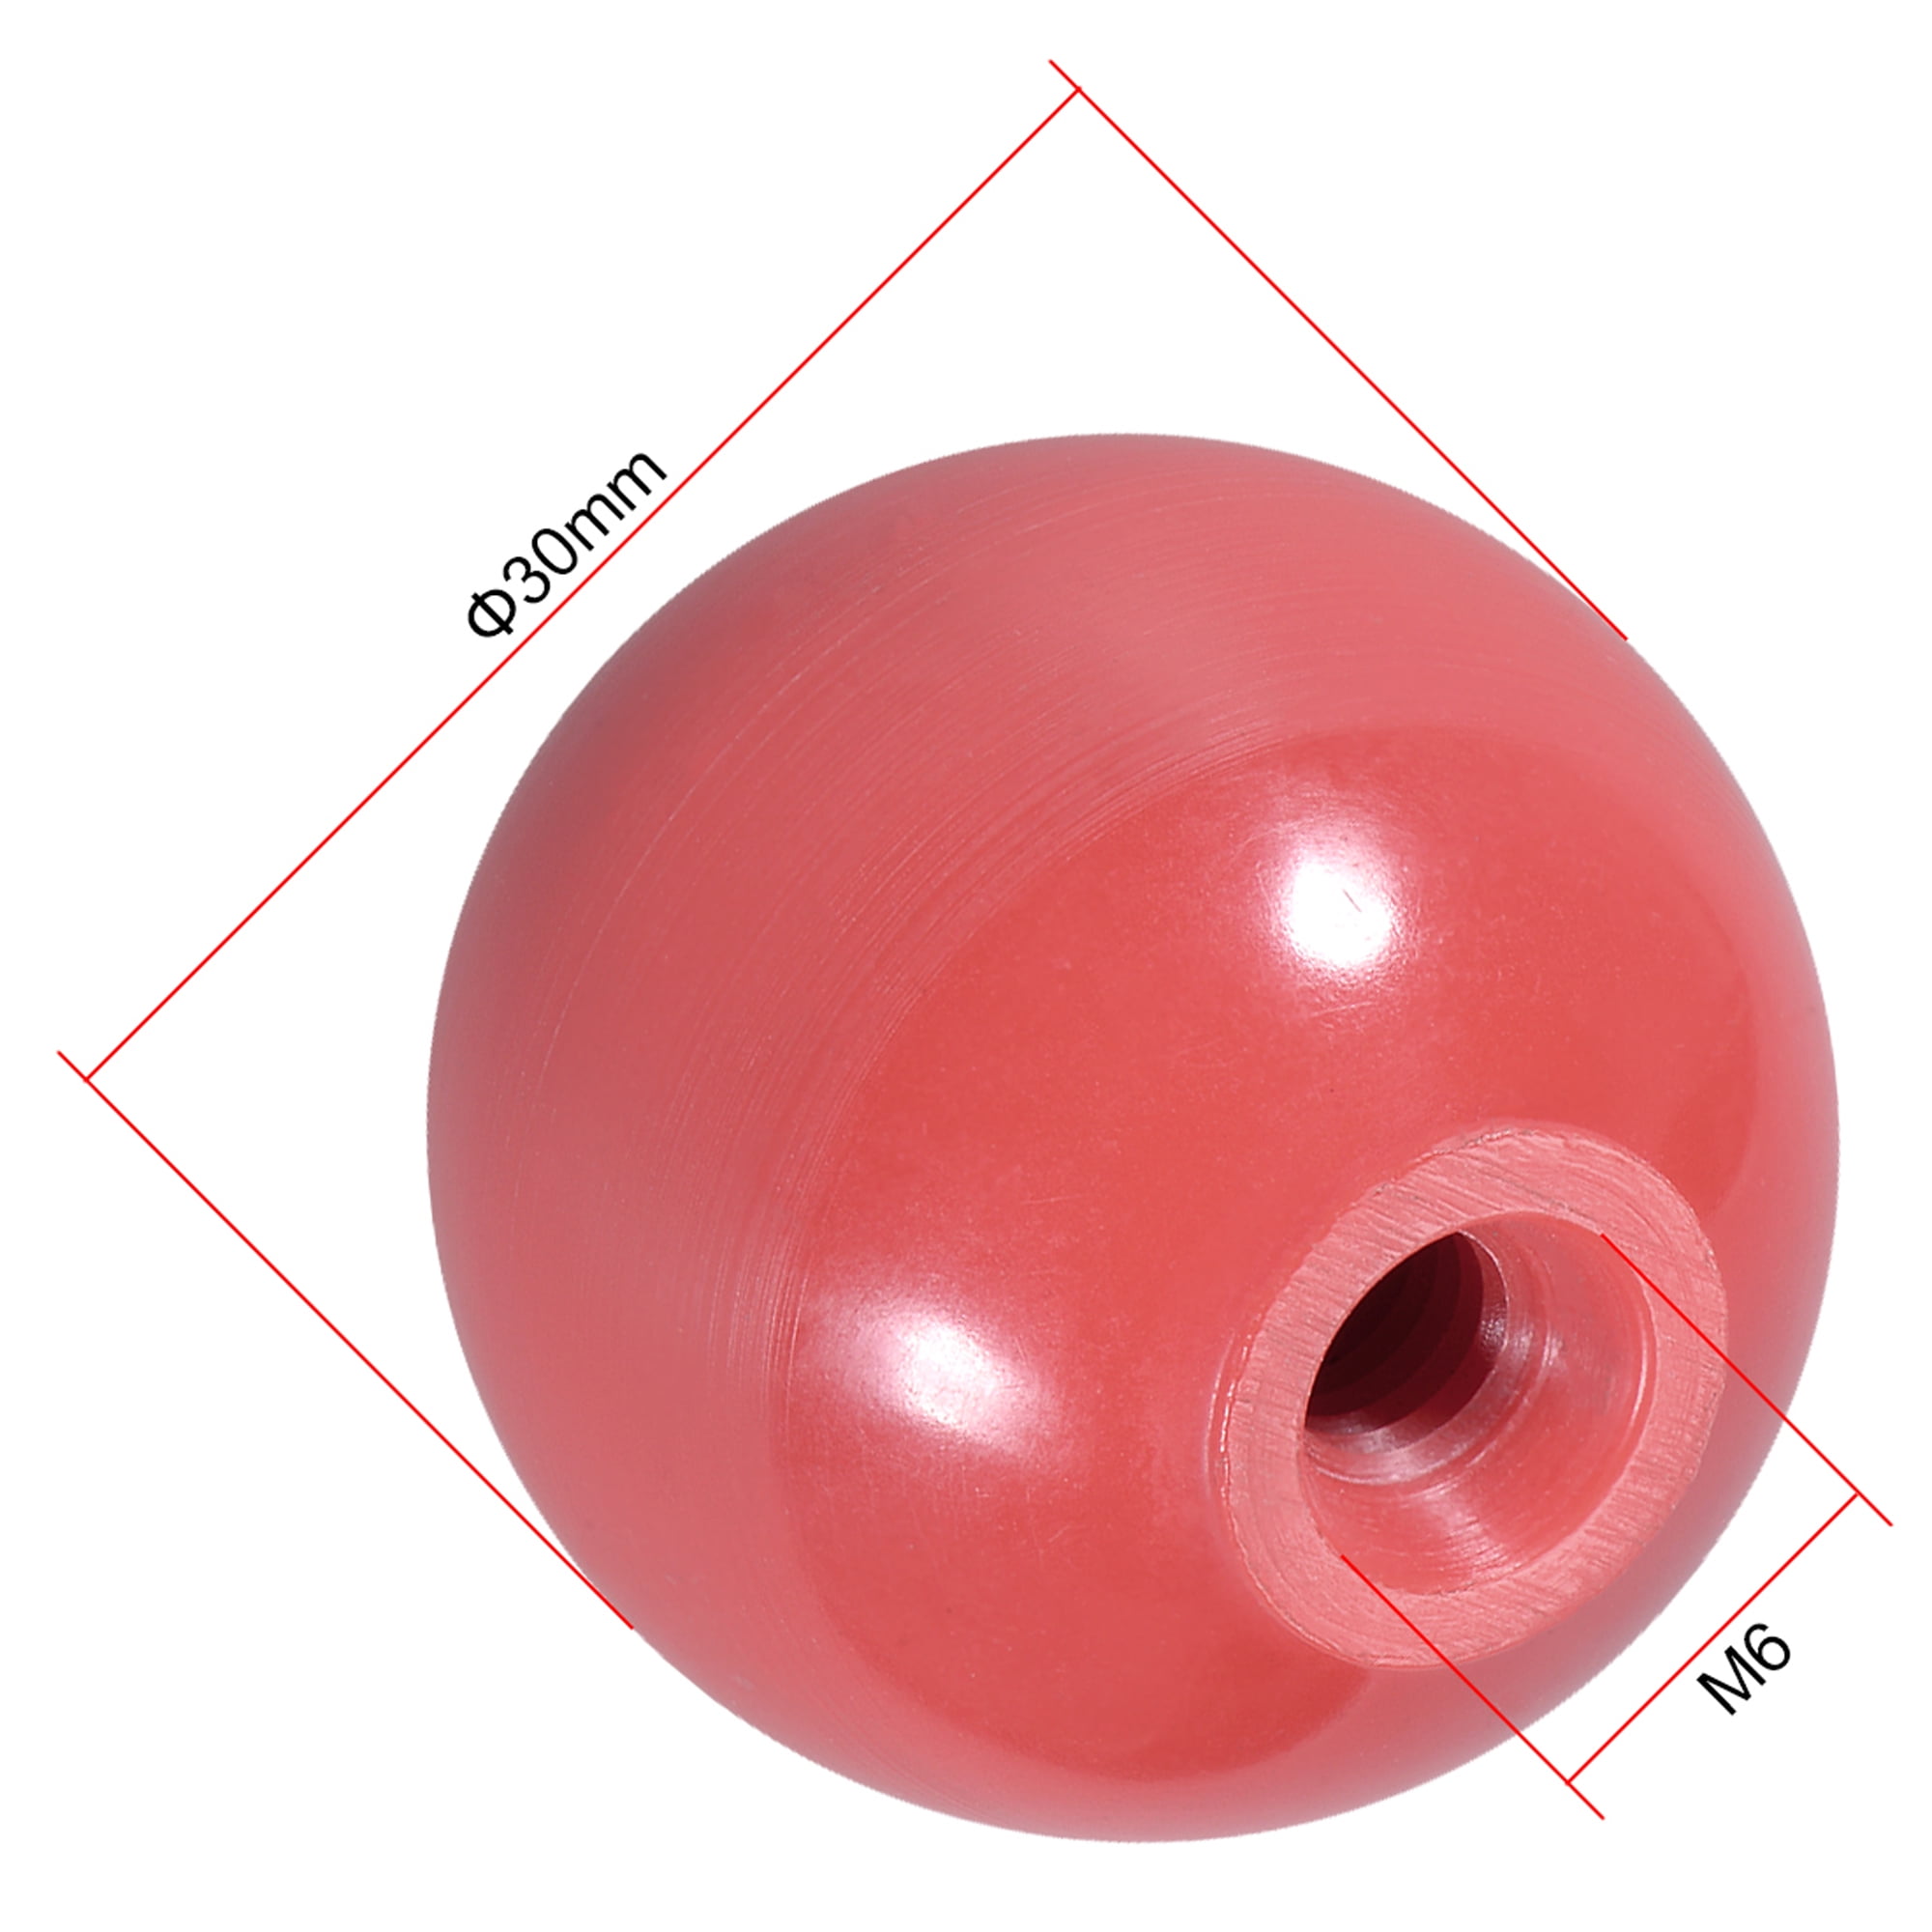 Details about   10 Pcs Thermoset Ball Knob M6 Female Thread Machine Handle 30mm Diameter Red 